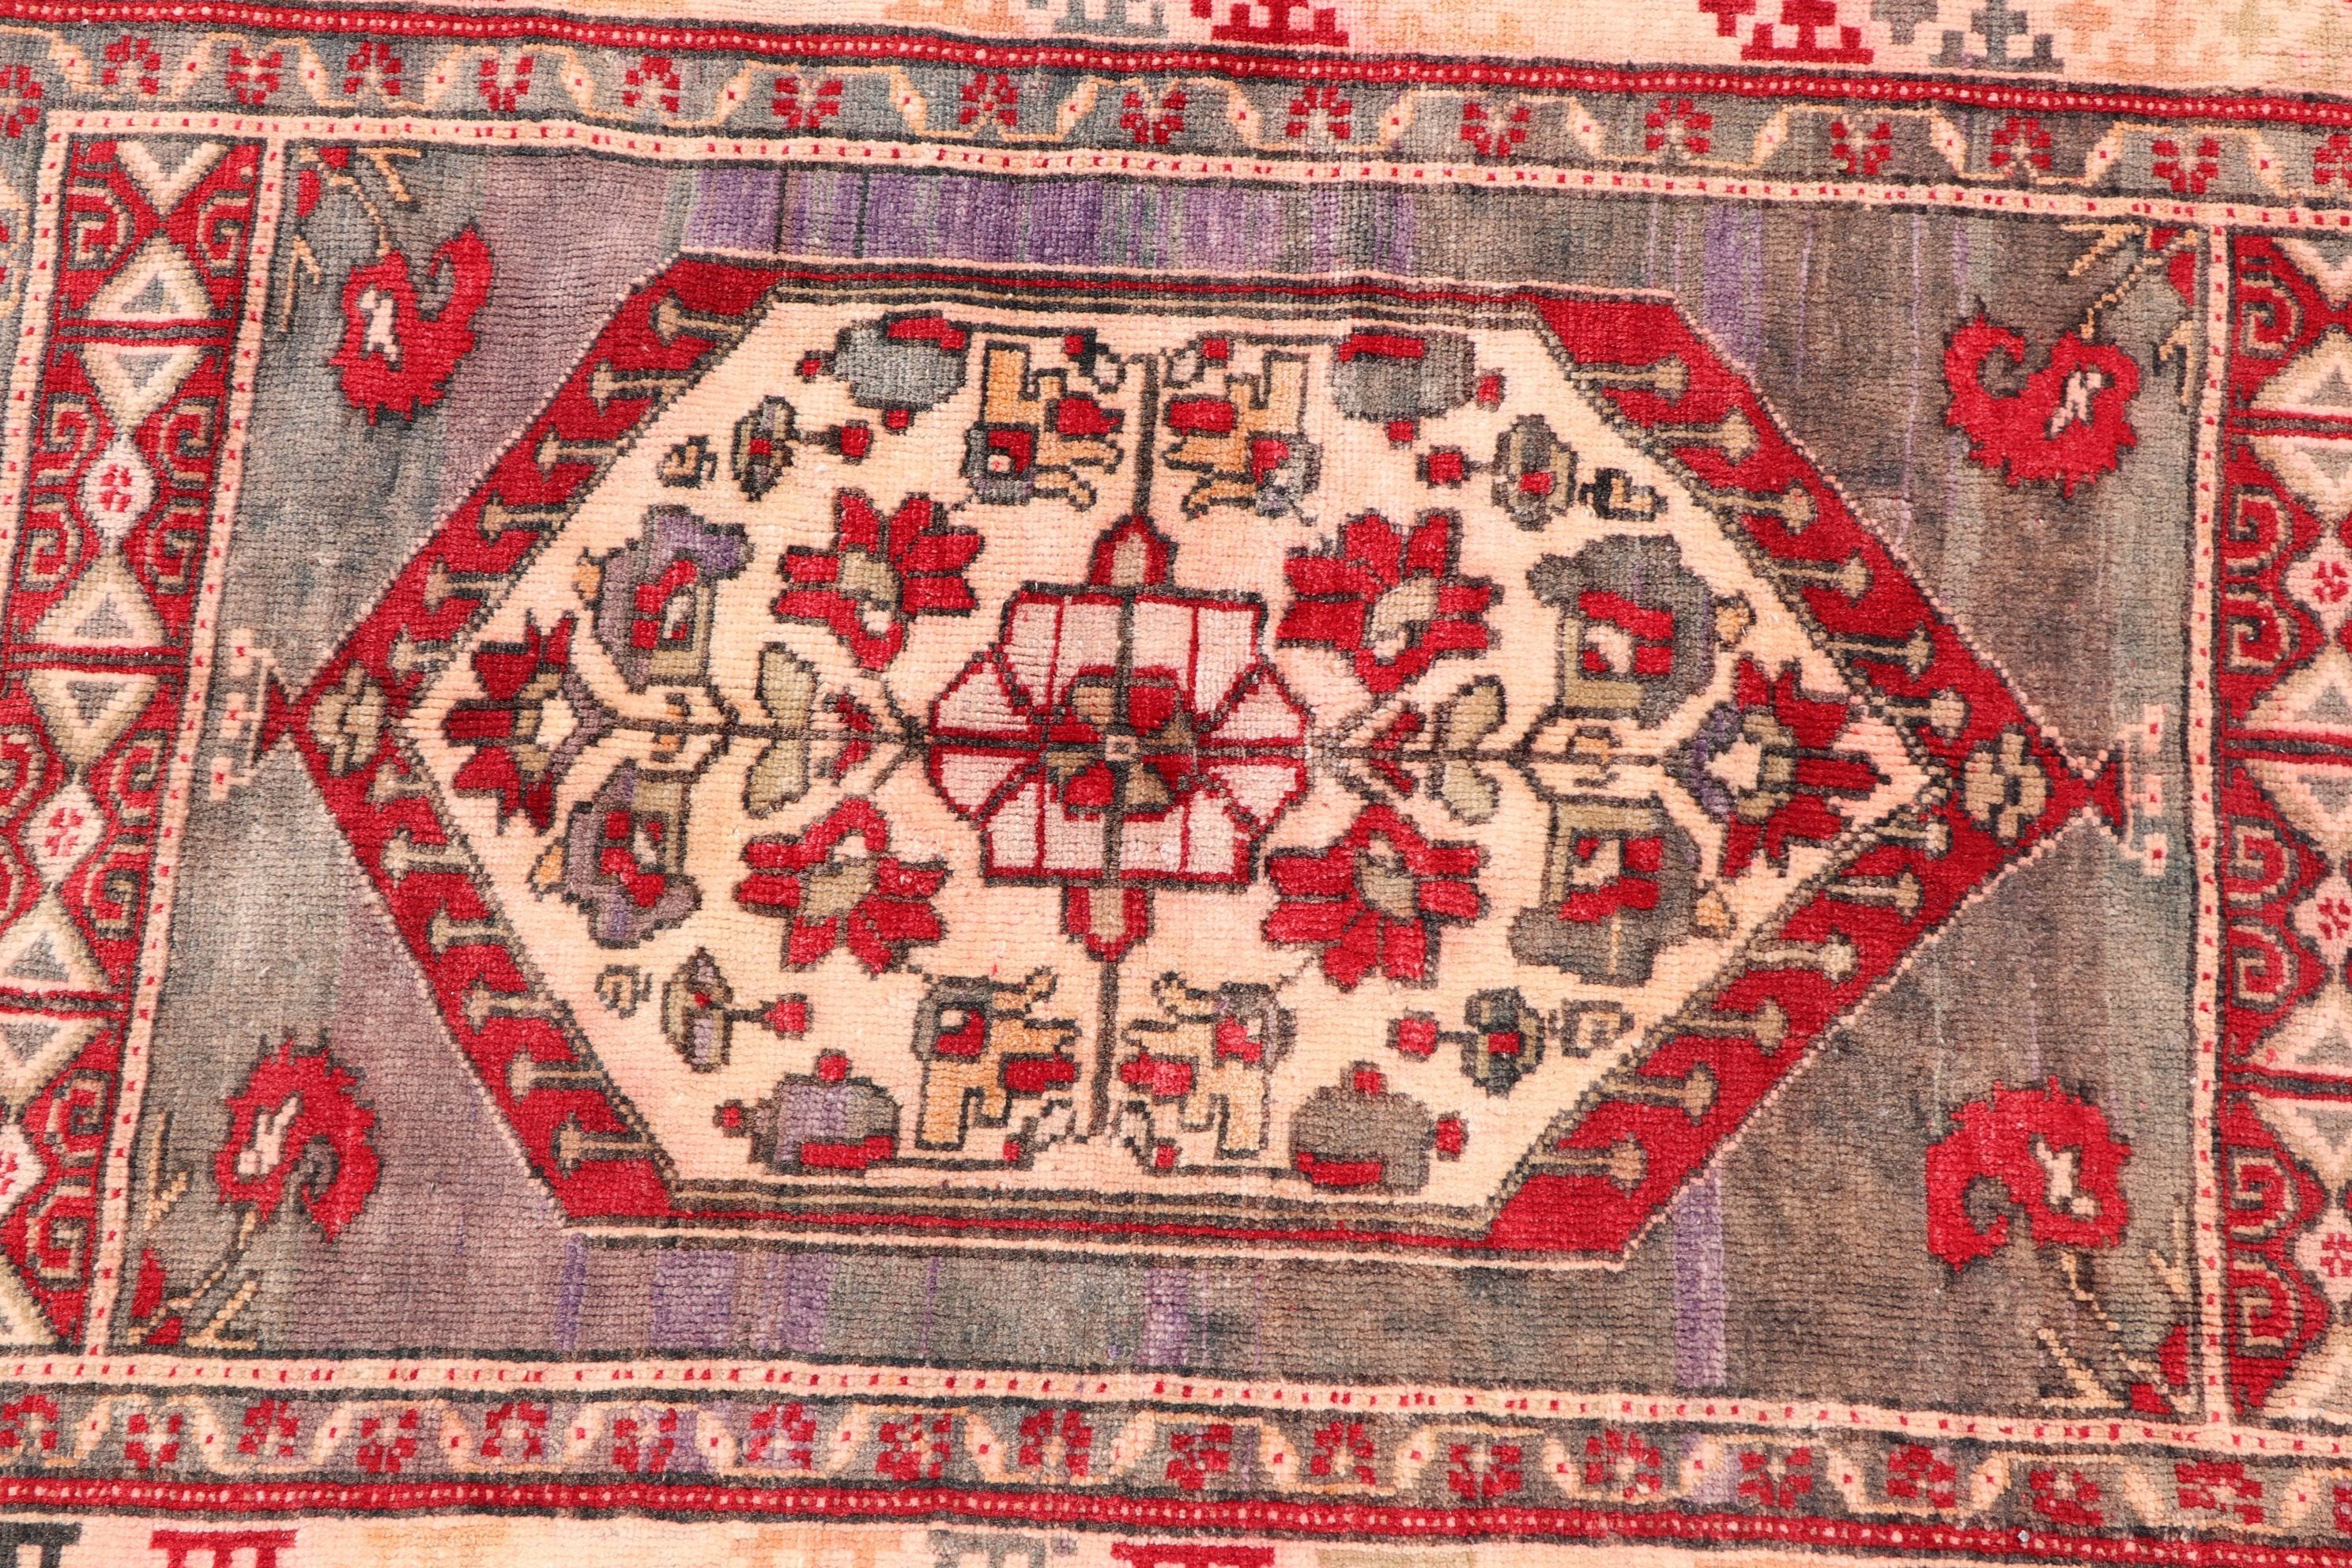 Car Mat Rug, 3x4 ft Small Rug, Red Antique Rug, Turkish Rug, Rugs for Kitchen, Wall Hanging Rug, Home Decor Rug, Antique Rugs, Vintage Rug